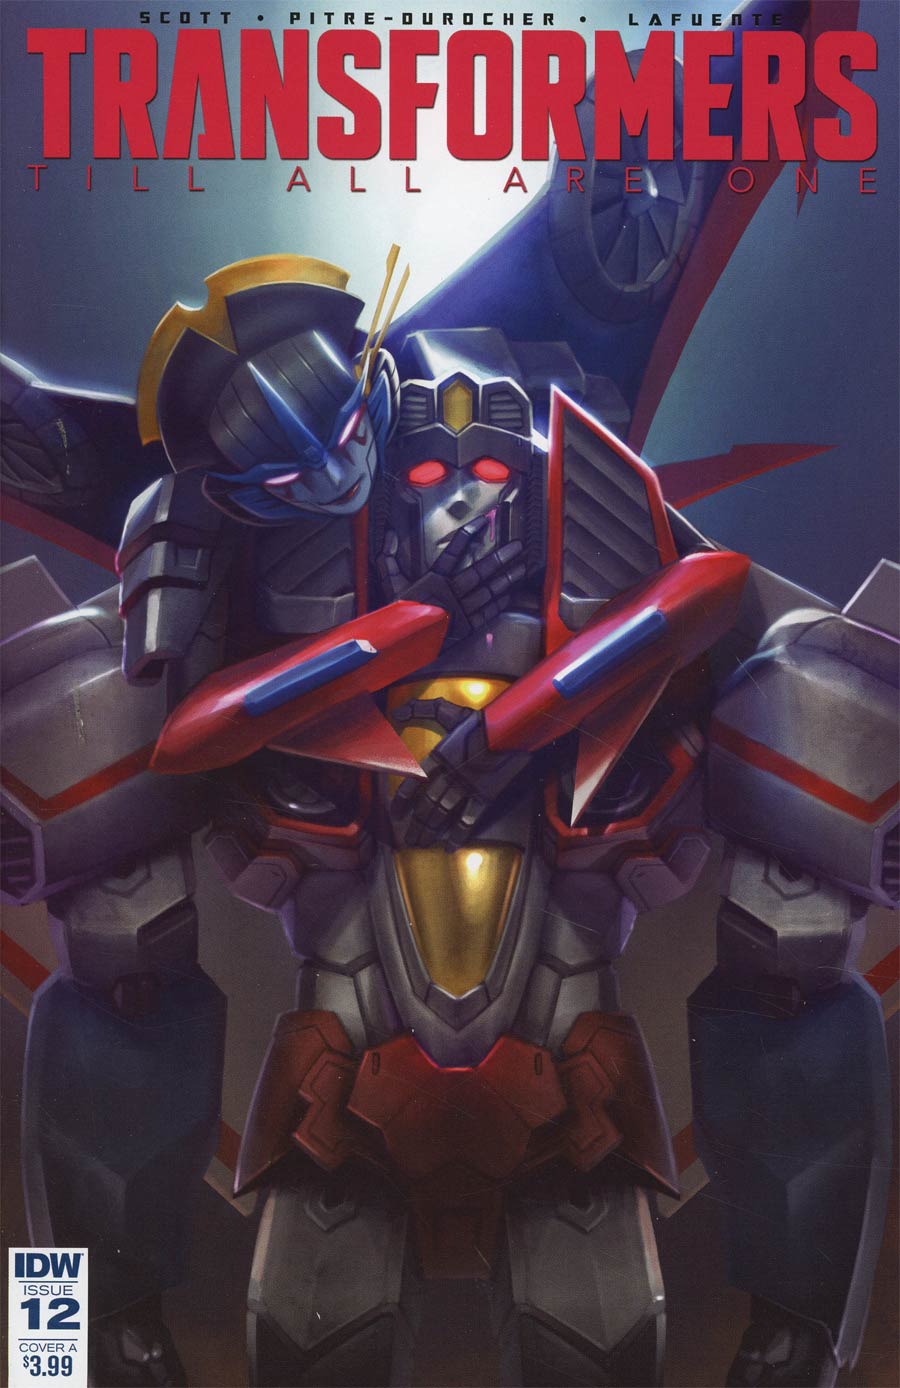 Transformers Till All Are One #12 Cover A Regular Sara Pitre-Durocher Cover